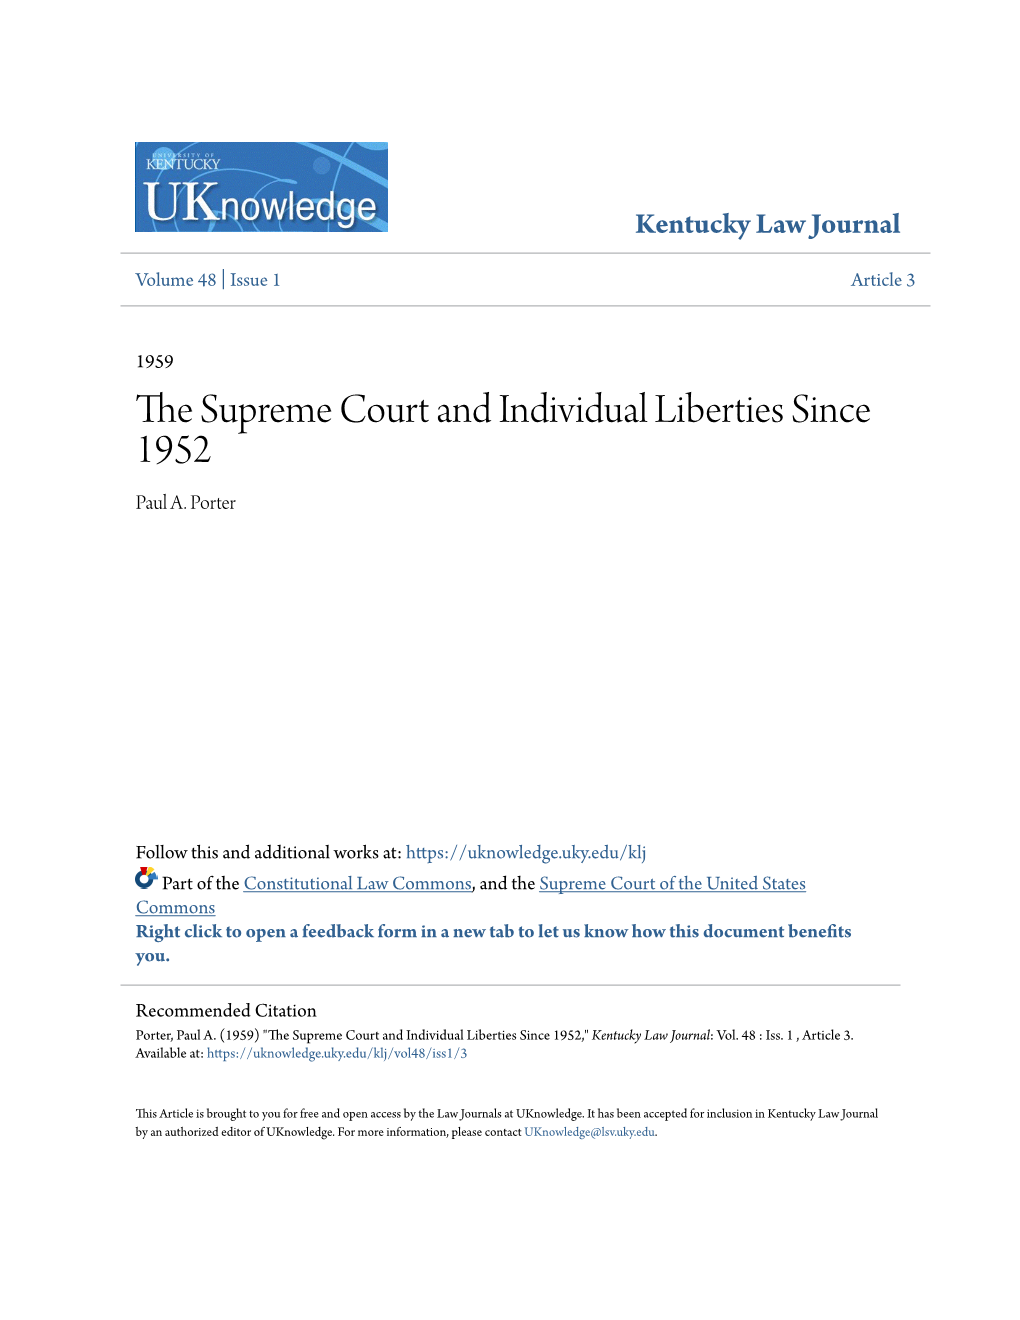 The Supreme Court and Individual Liberties Since 1952